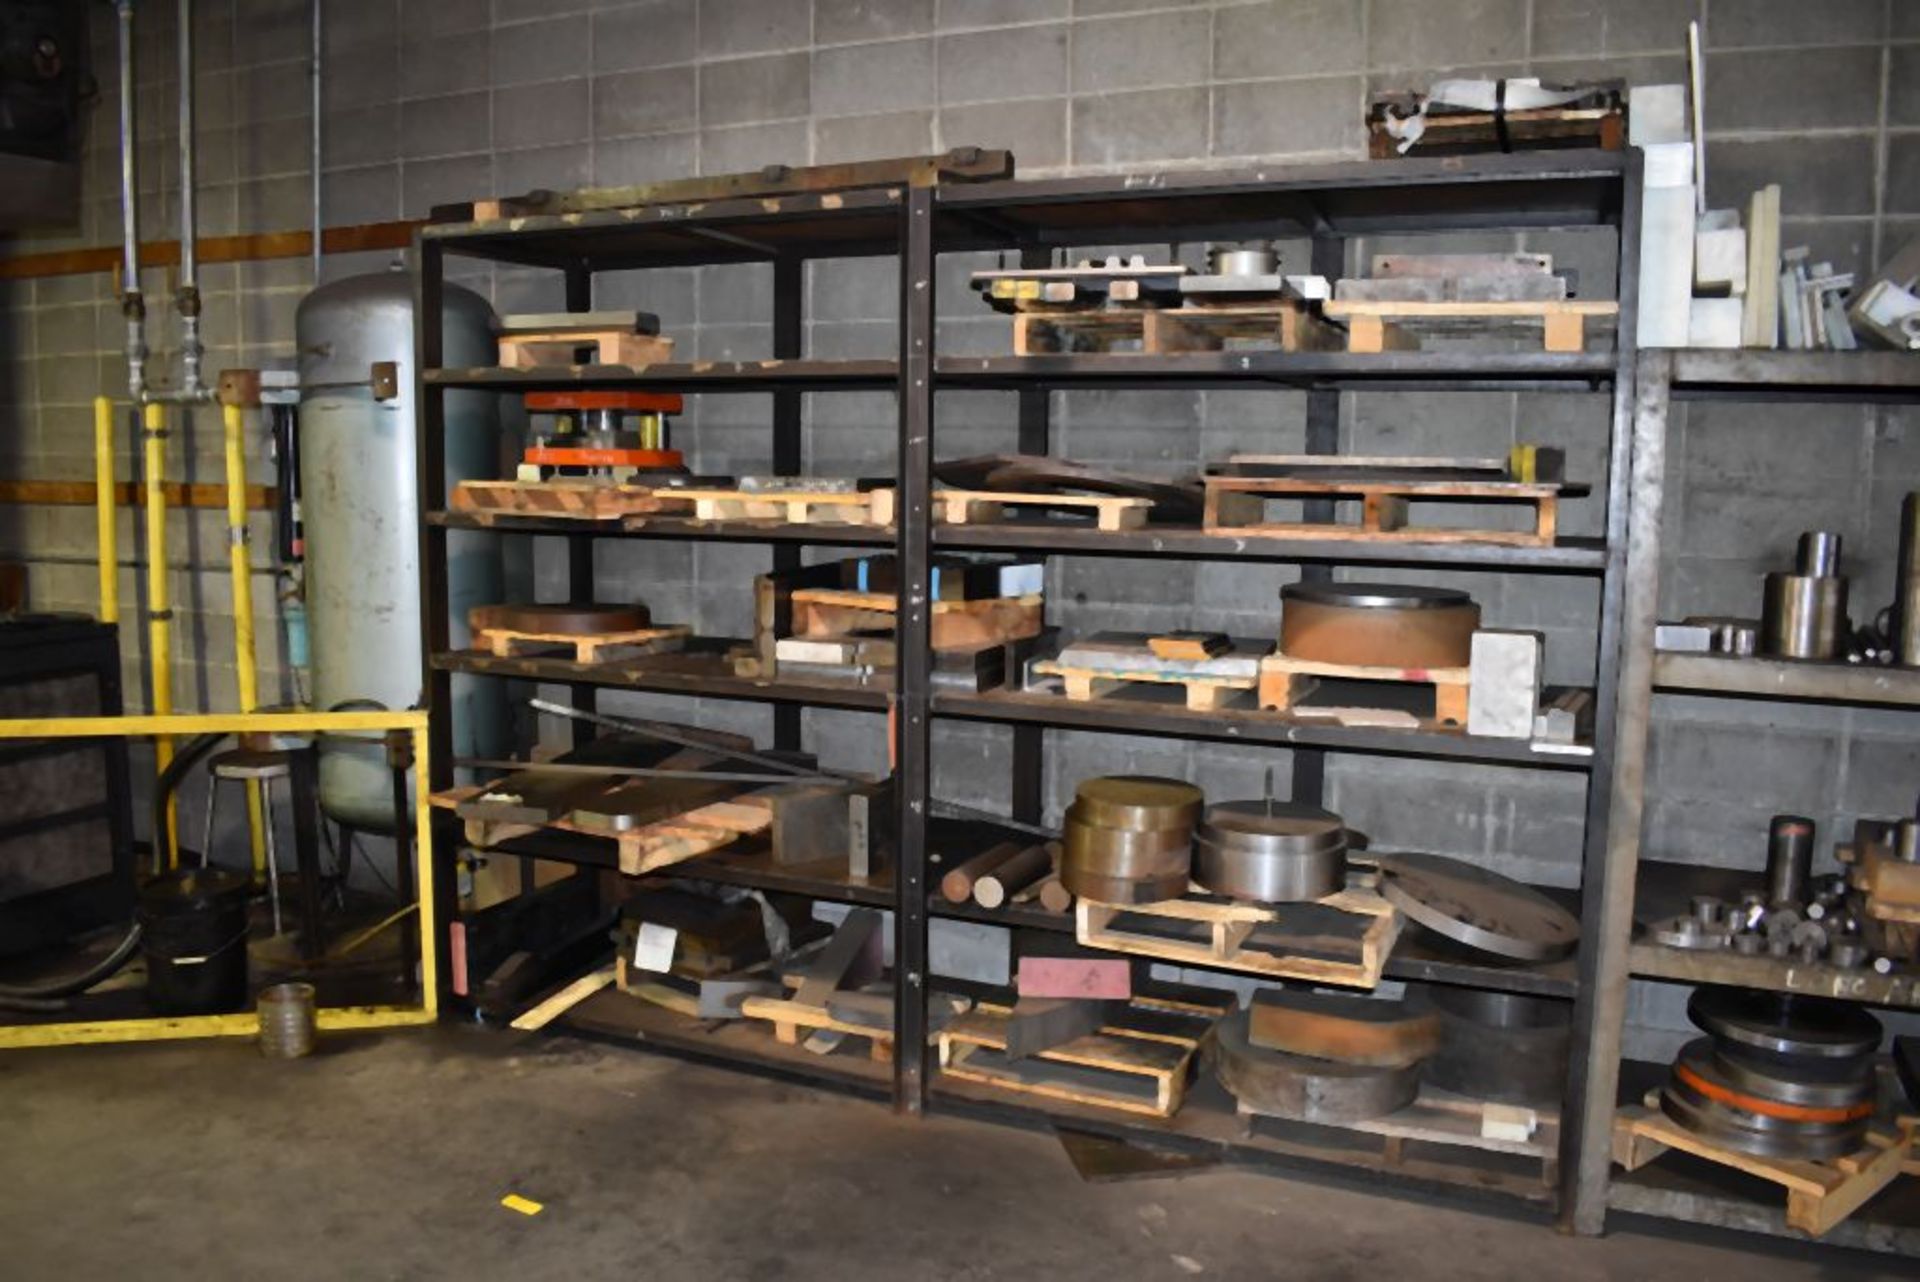 HEAVY DUTY STEEL SHELVING UNIT WITH CONTENTS, 10'2"L x 30"D x 90"H